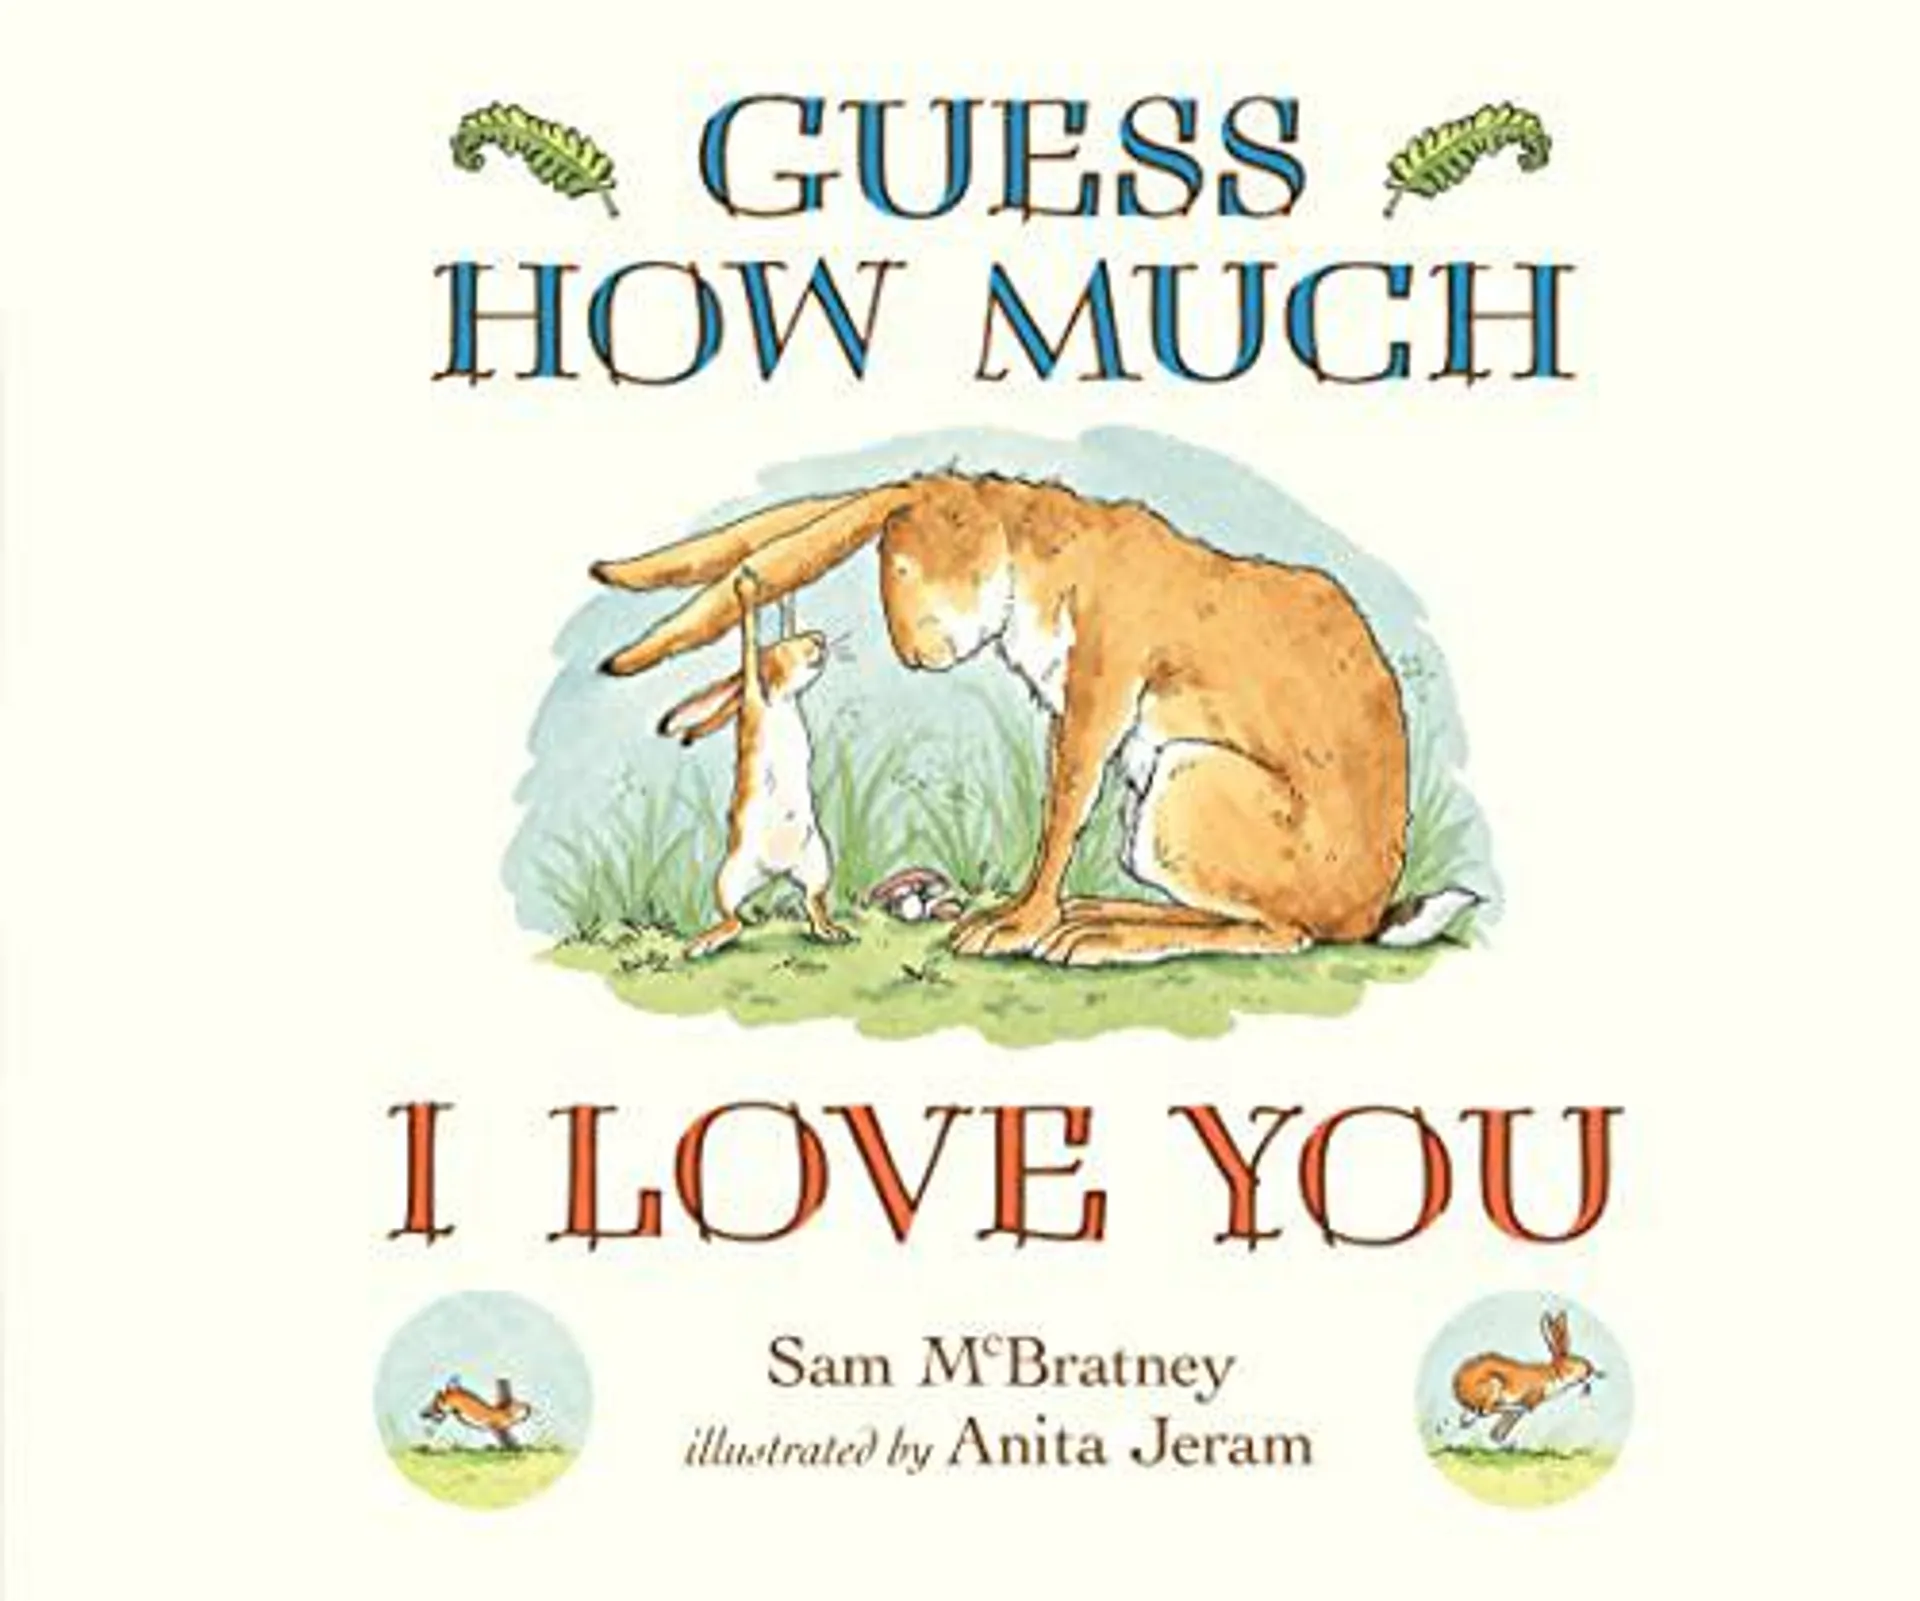 Guess How Much I Love You by Anita Jeram